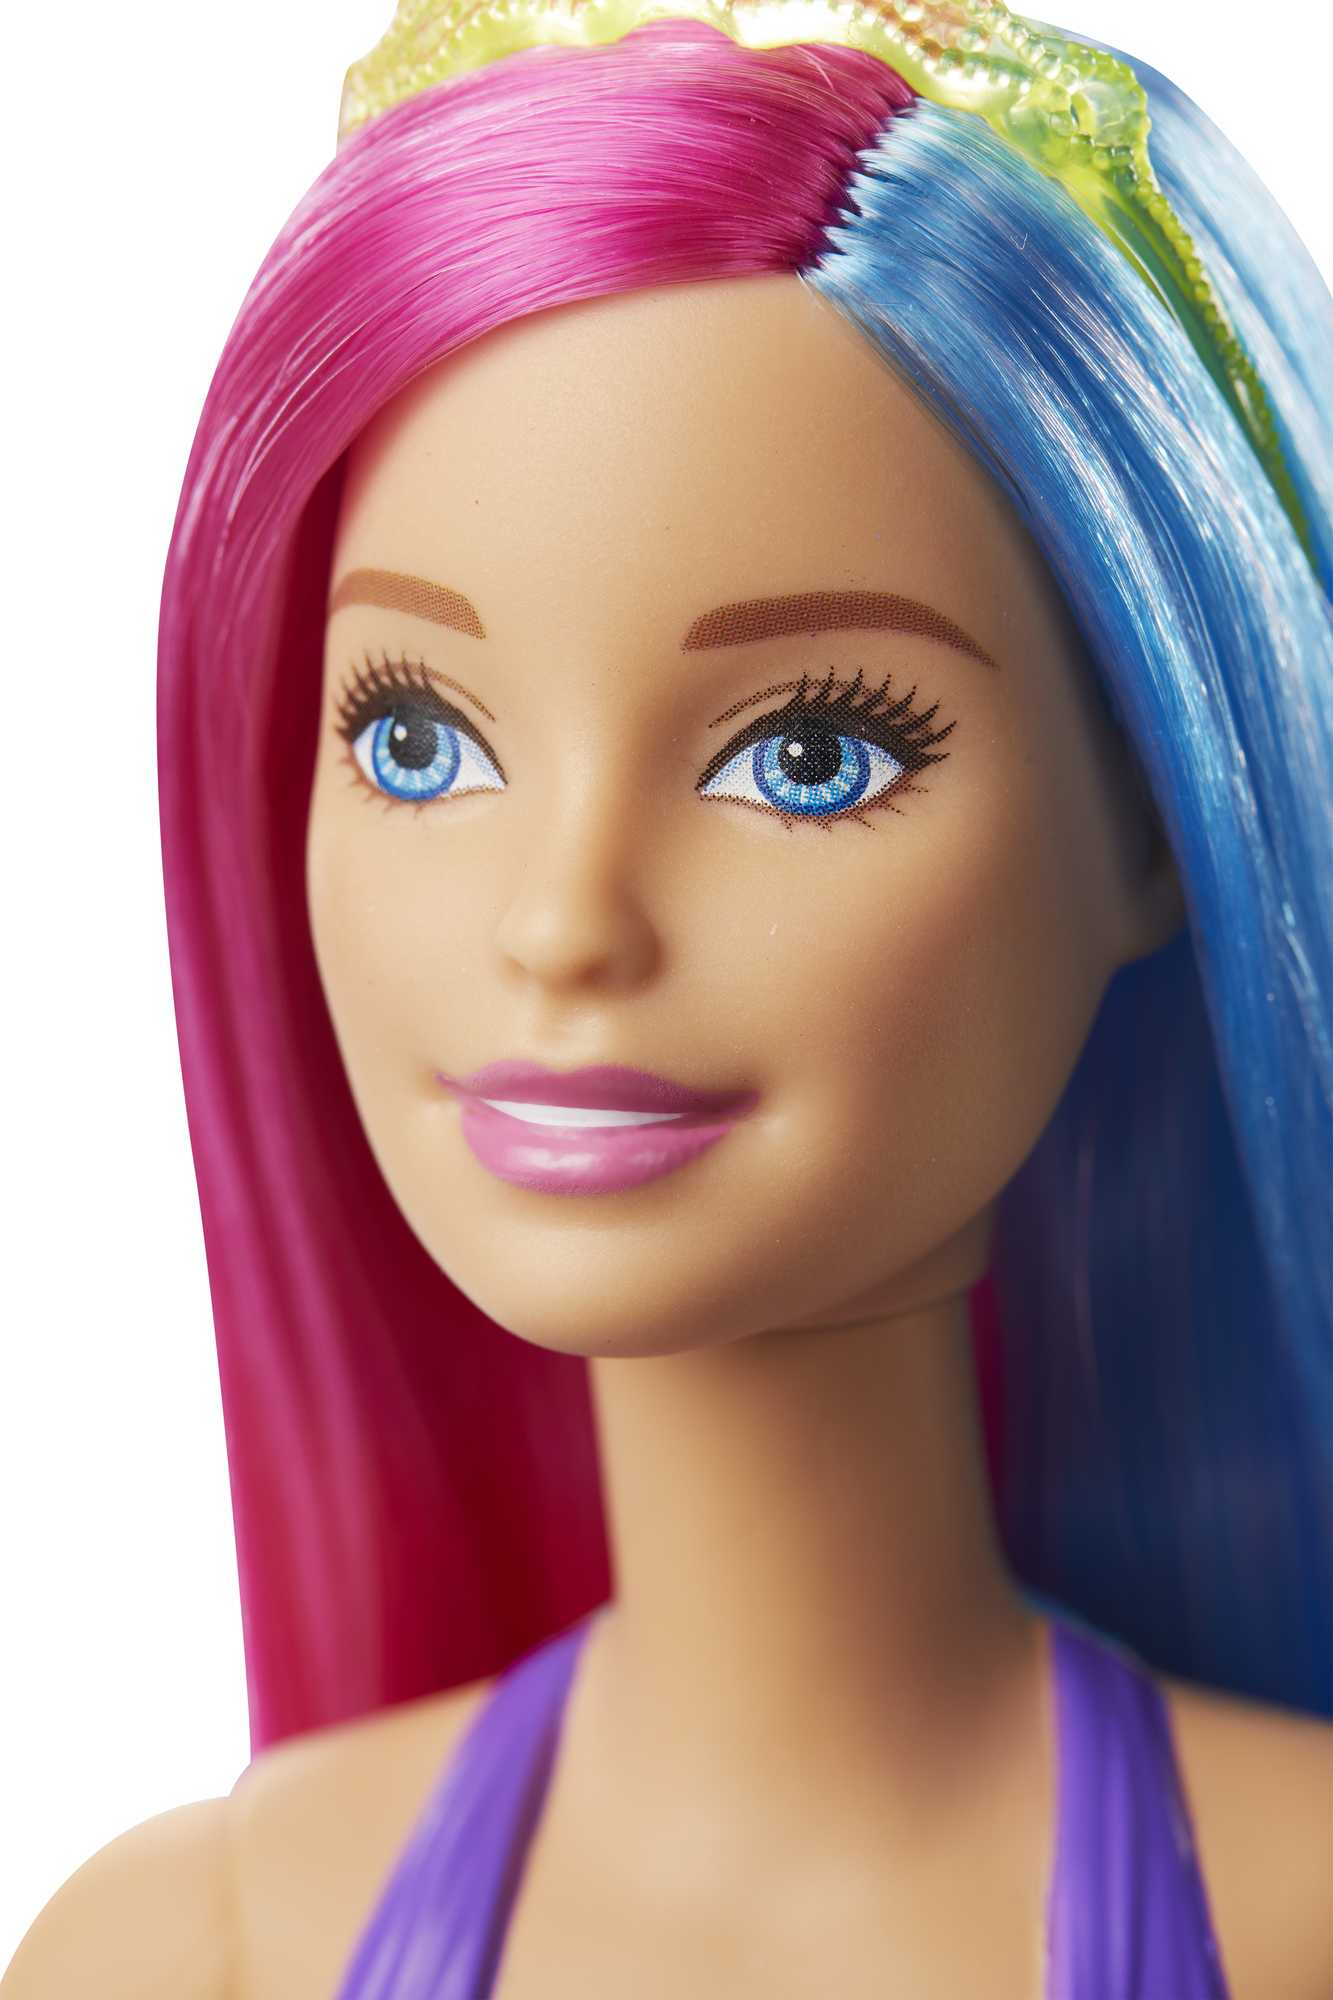 Barbie Dreamtopia Mermaid Doll with Pink & Blue Hair & Tail, Plus Tiara Accessory - image 2 of 6